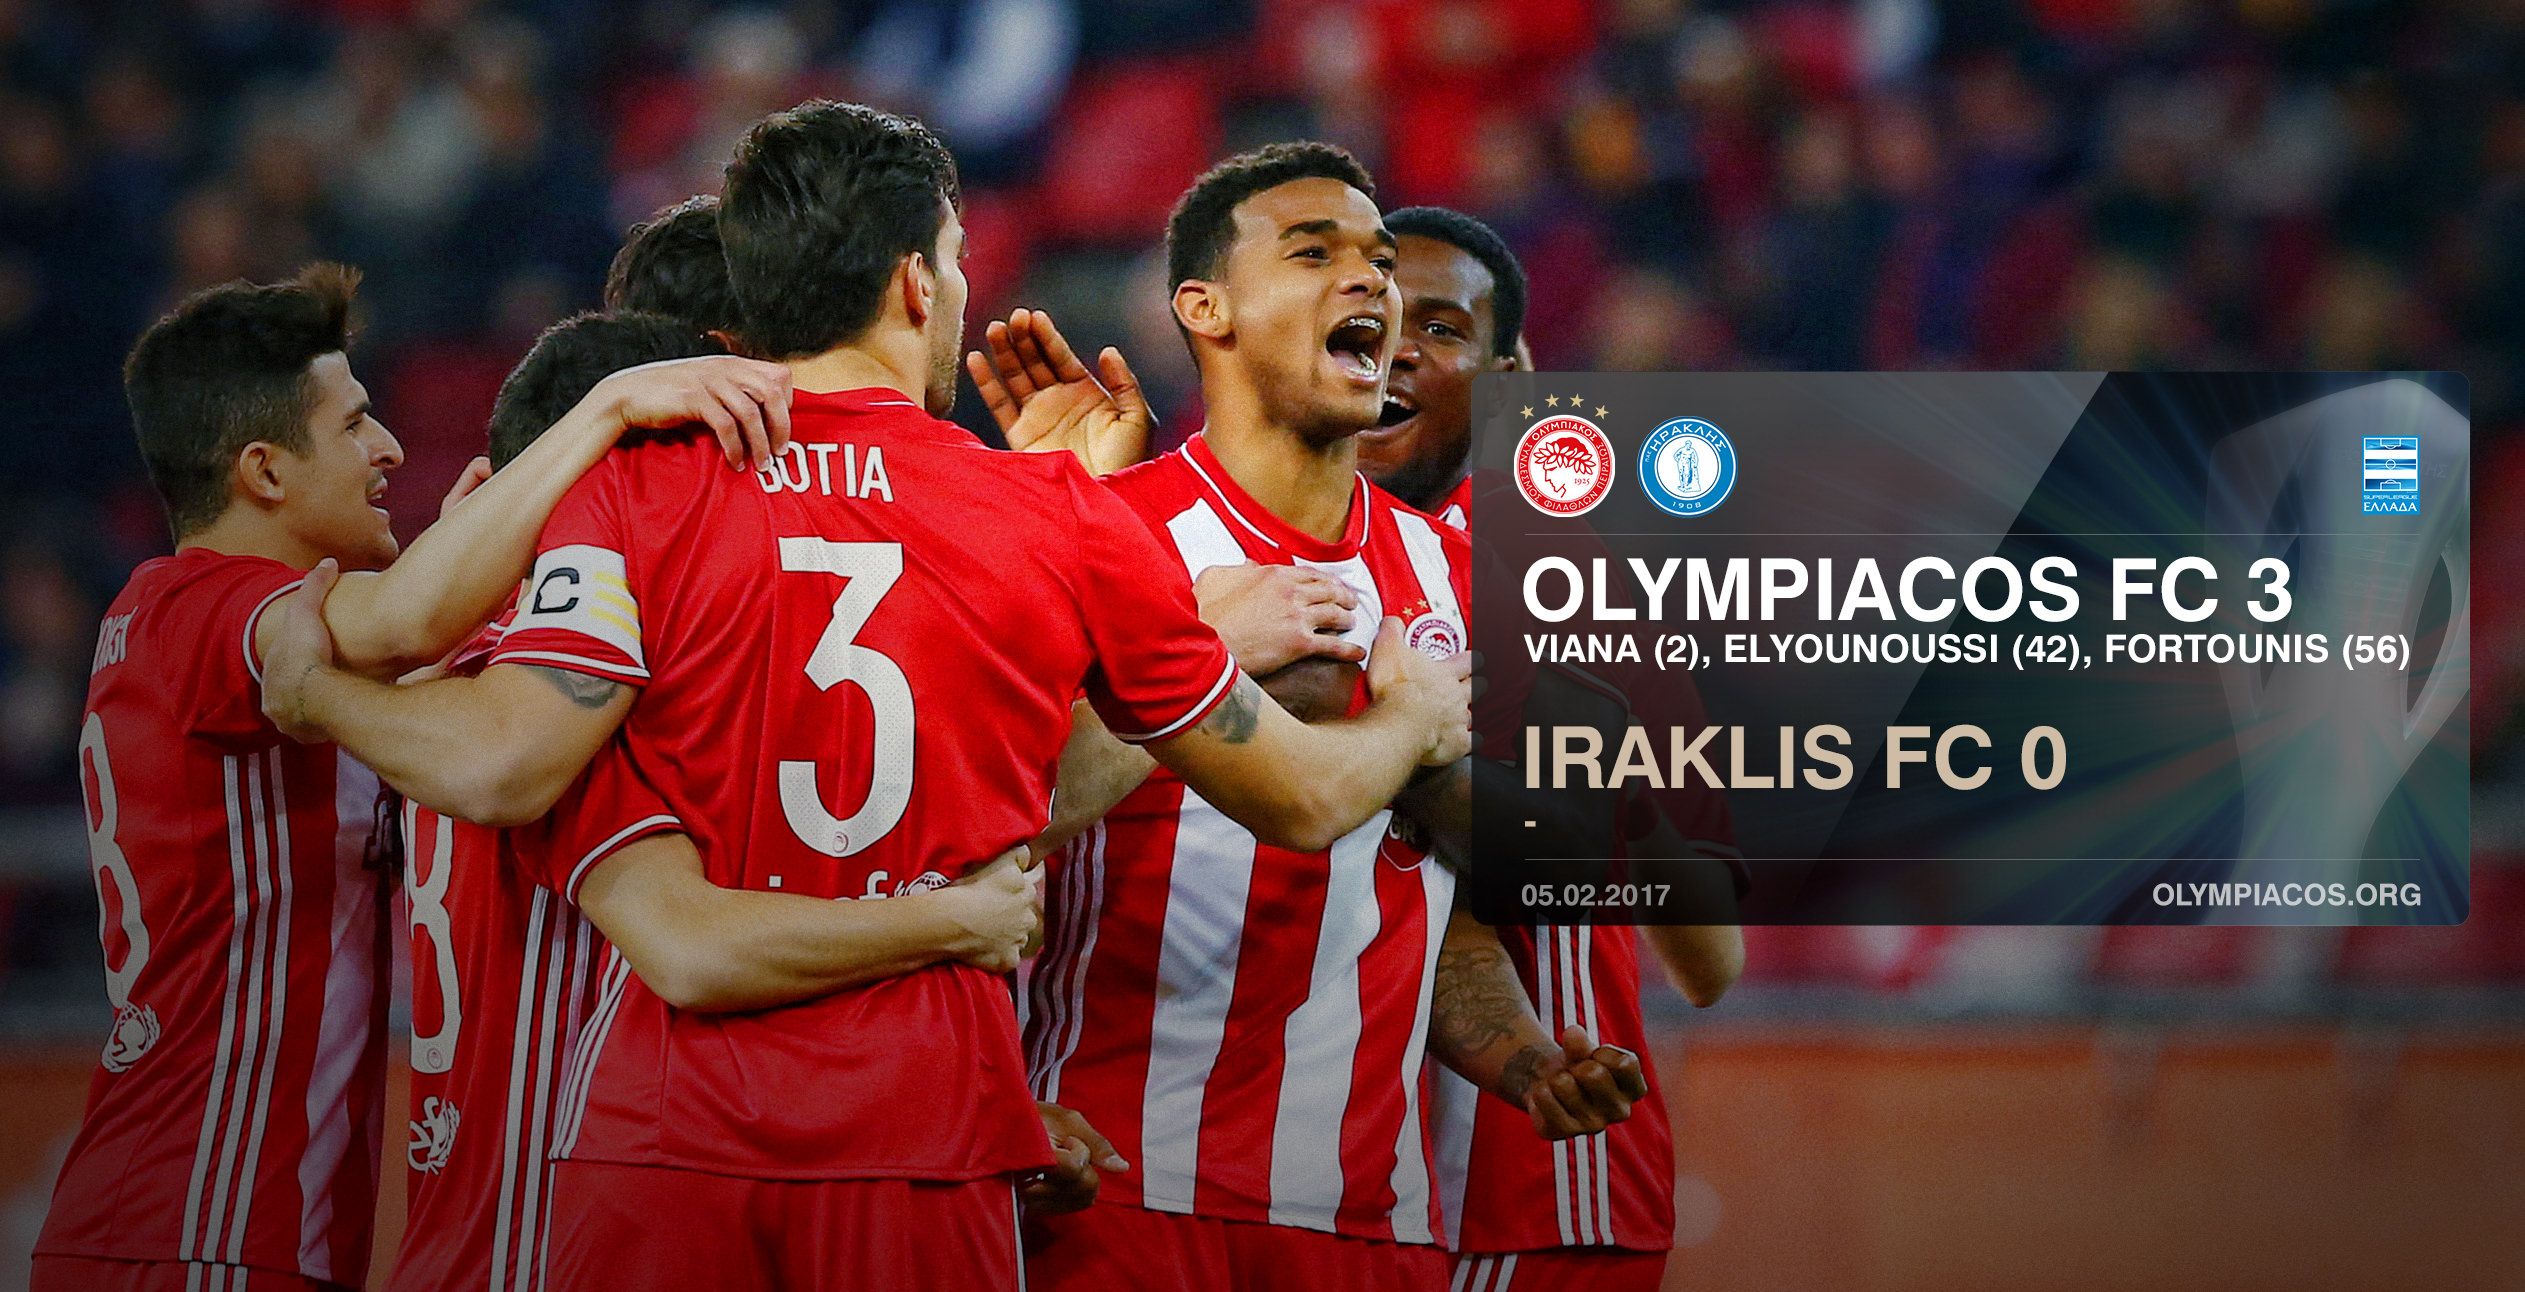 A delivering and impressive Olympiacos